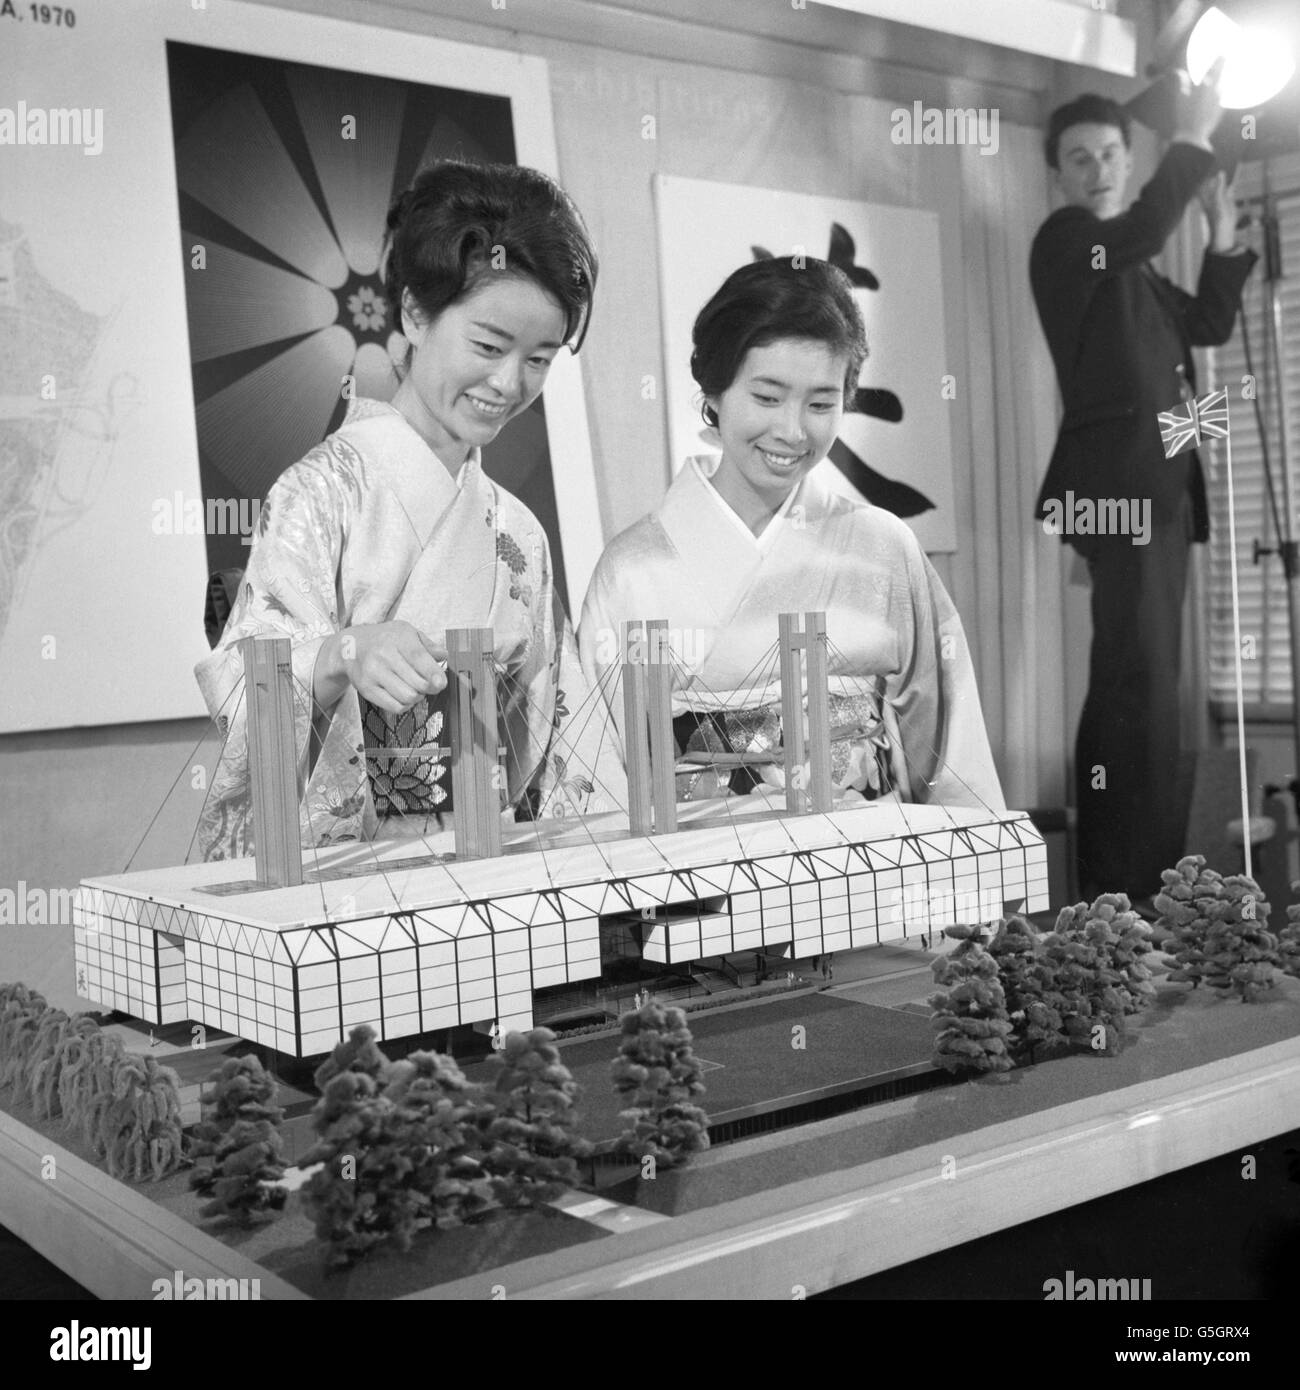 Kimono-clad Mrs M. Orita, left, and Mrs F. Nanami, from the Japanese Embassy in London, view a model of the British Pavilion for Japan's Expo '70 in Osaka. The model was on display at the Central Office of Information in London, which on behalf of the Foreign and Commonwealth Office, is responsible for the design, building, equipping and management of Britain's official display. Stock Photo